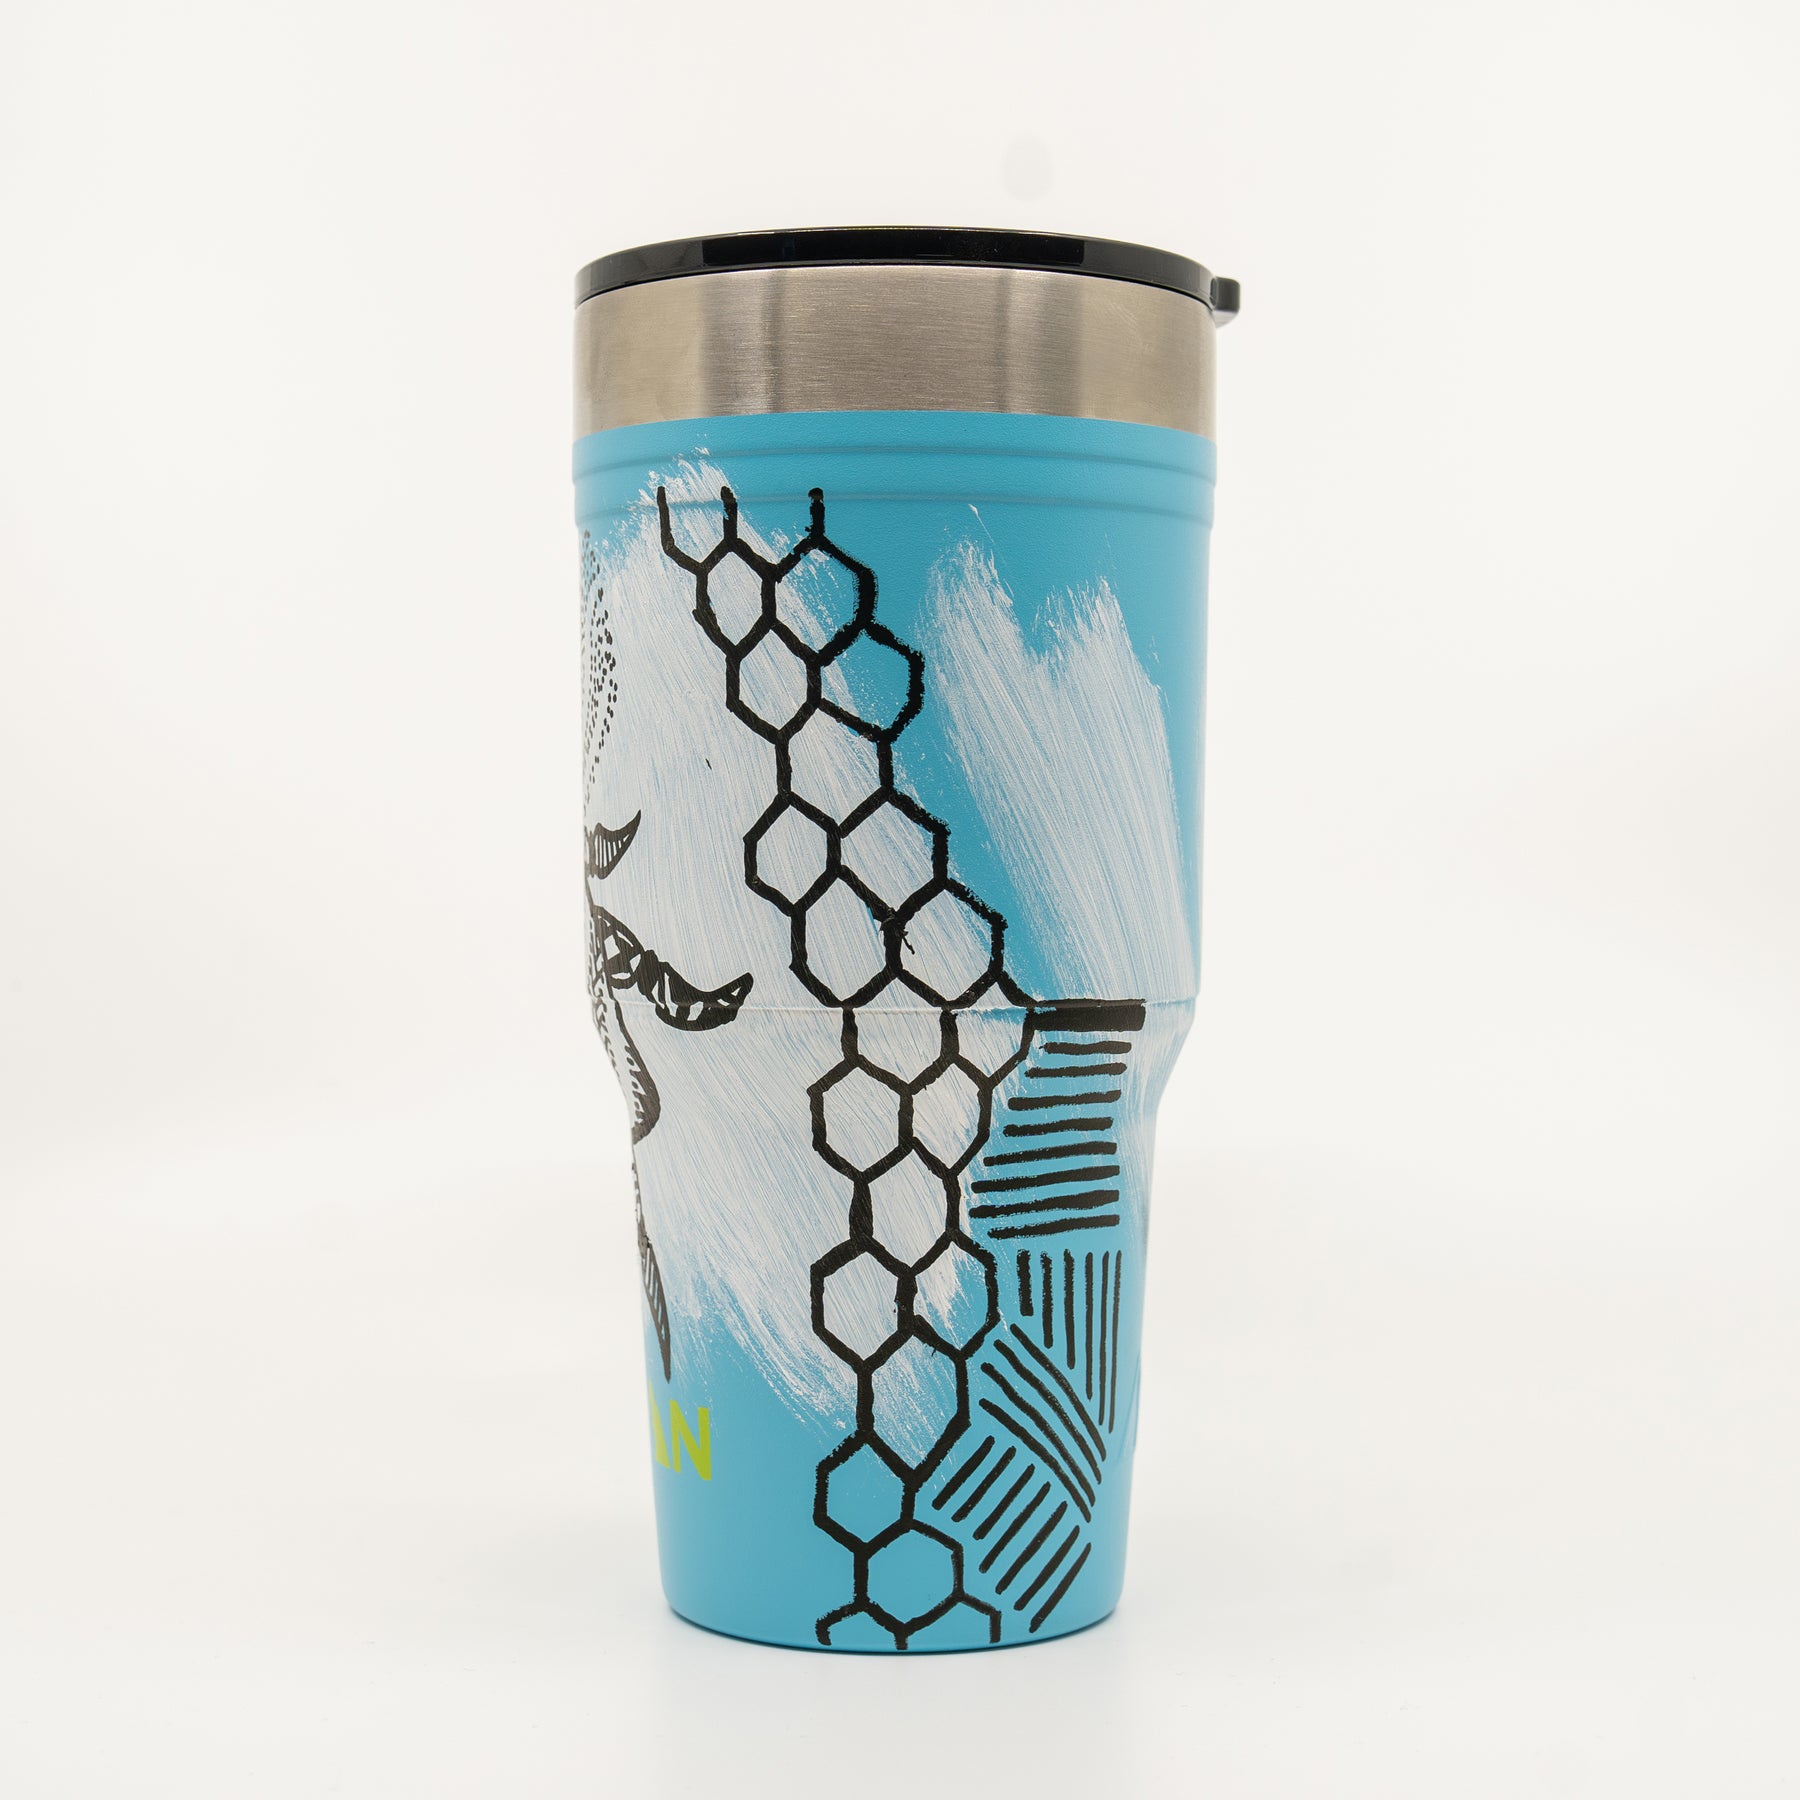 Limited Edition 30 Oz. Stainless Steel Tumbler